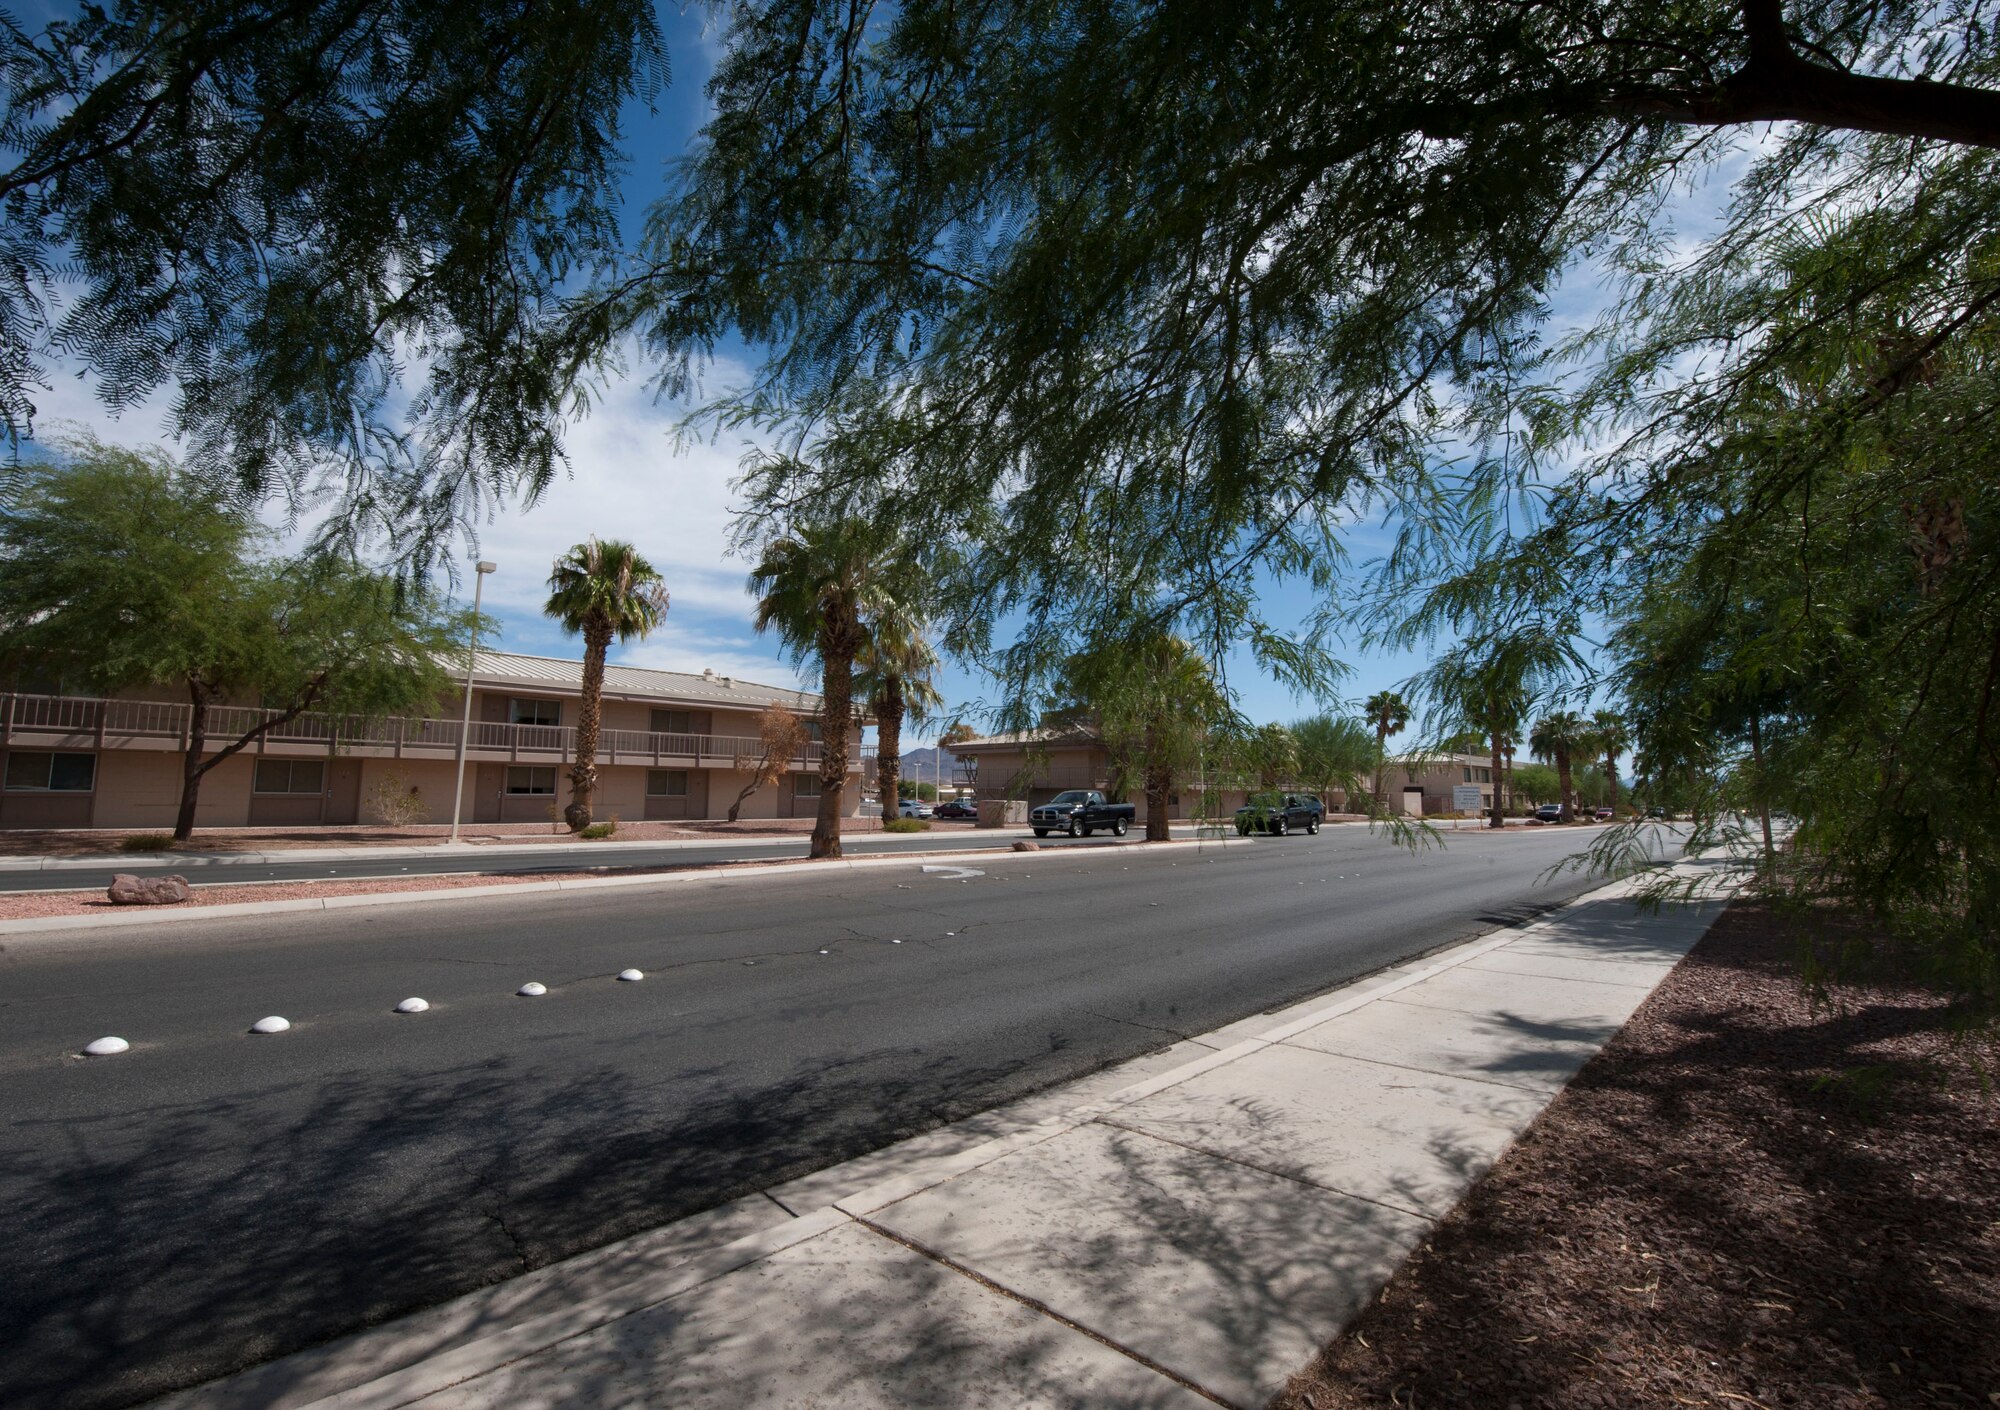 Cars drive down Washington Boulevard on Nellis Air Force Base, Nev., Sept. 30, 2015. Construction on Washington Boulevard began March 16 and was officially completed Sept. 11, 2015. The construction was finished approximately 30 days early. (U.S. Air Force photo by Airman 1st Class Mikaley Kline)